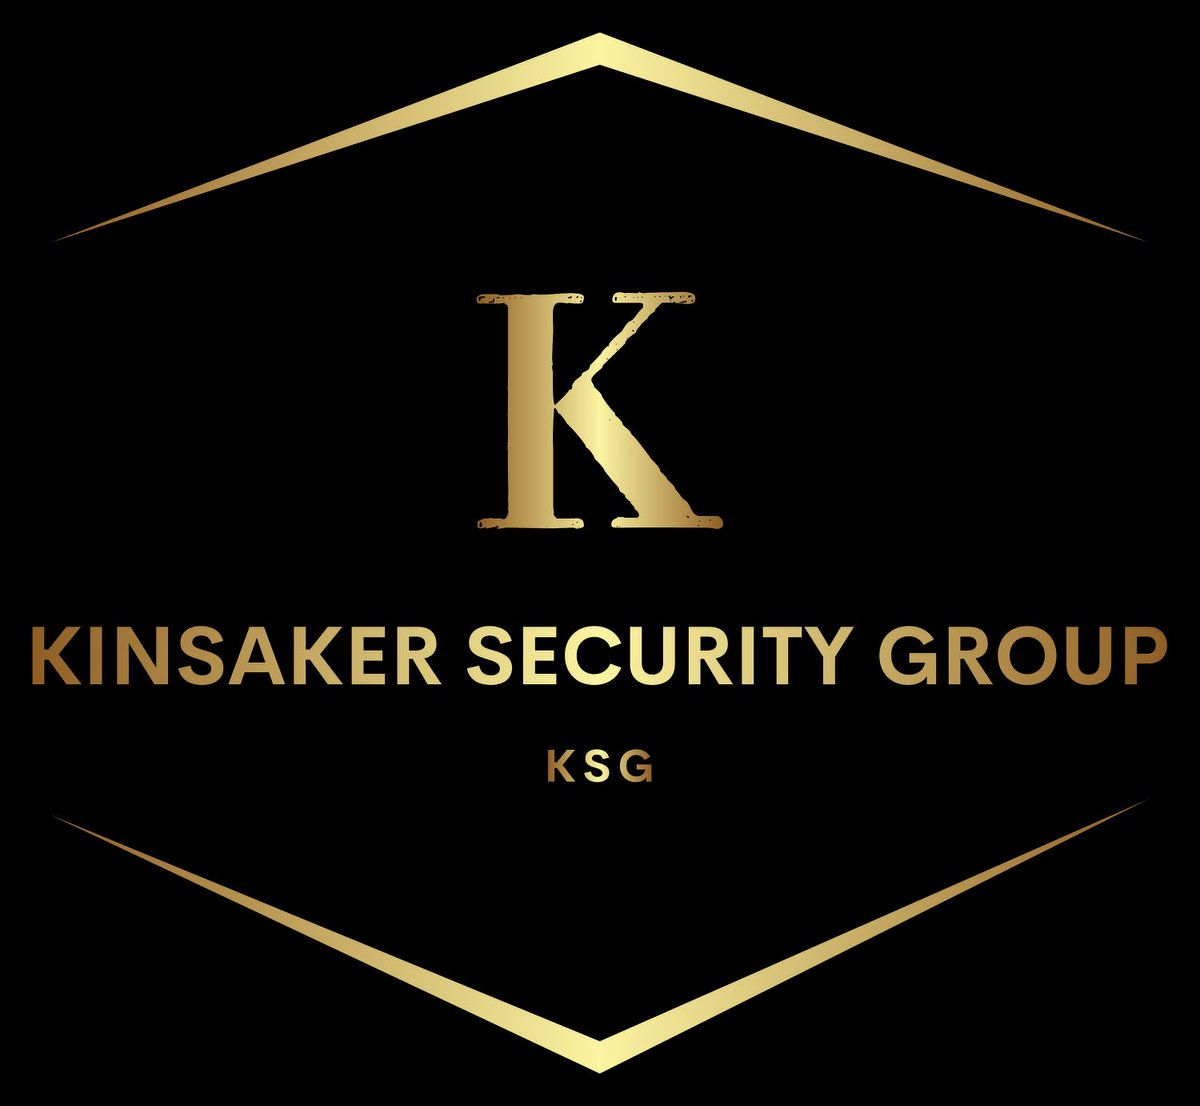 Is Your Organization in Need of Background Checks? Contact Kinsaker Security Group for all your Security Needs buff.ly/47qMGKY #workplaceviolence
#security
#executiveprotection
#organizationalsecurity
#threatassessments
#kinsakersecurity